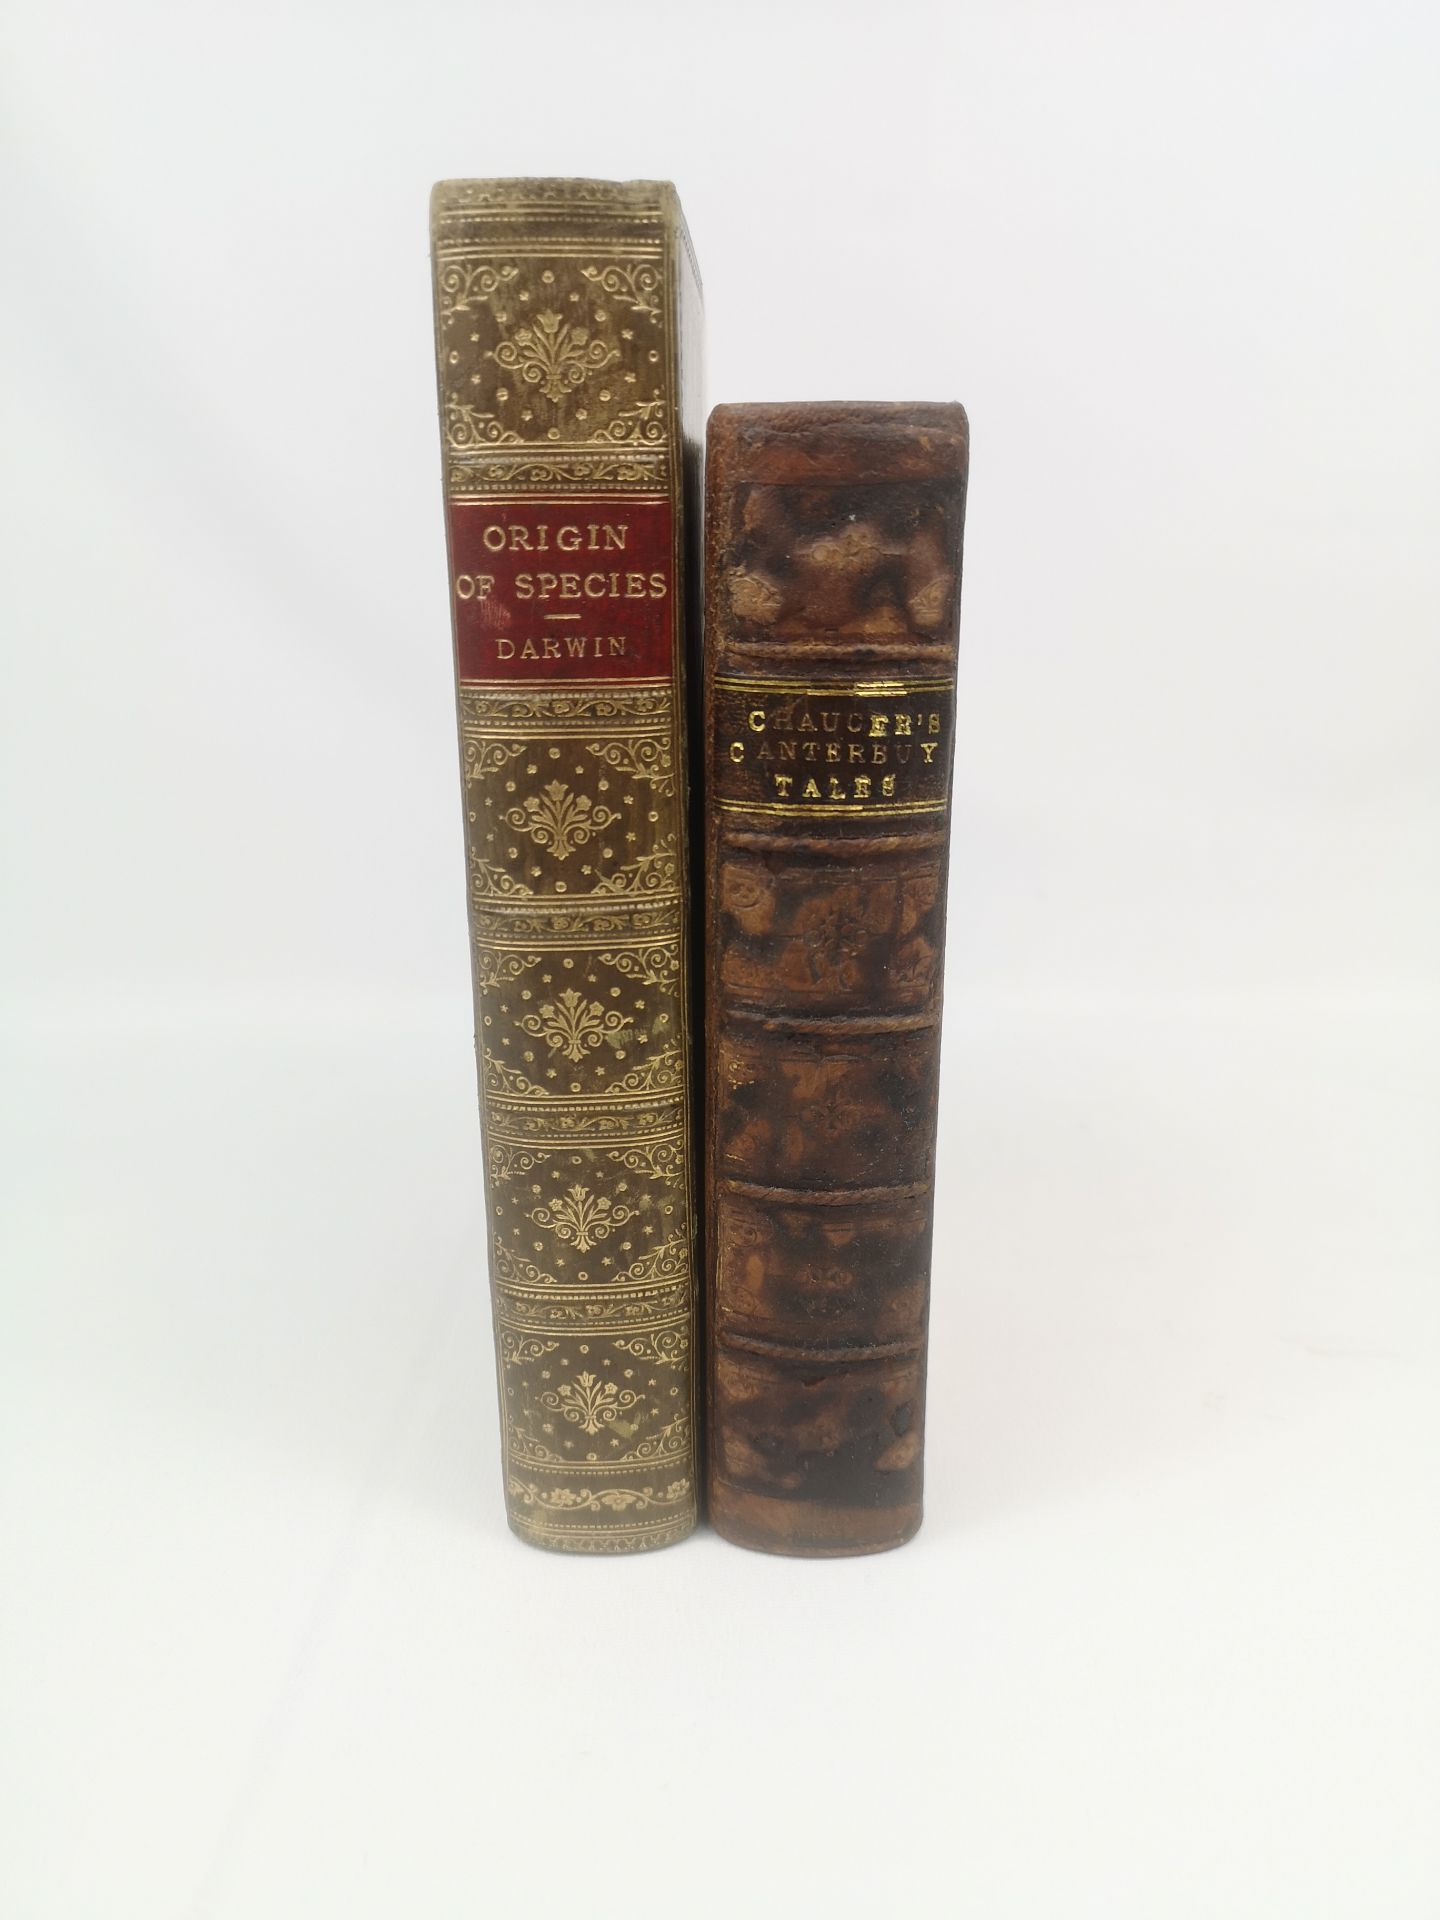 The Origin of Species by Charles Darwin, leather bound, published John Murray, 1901